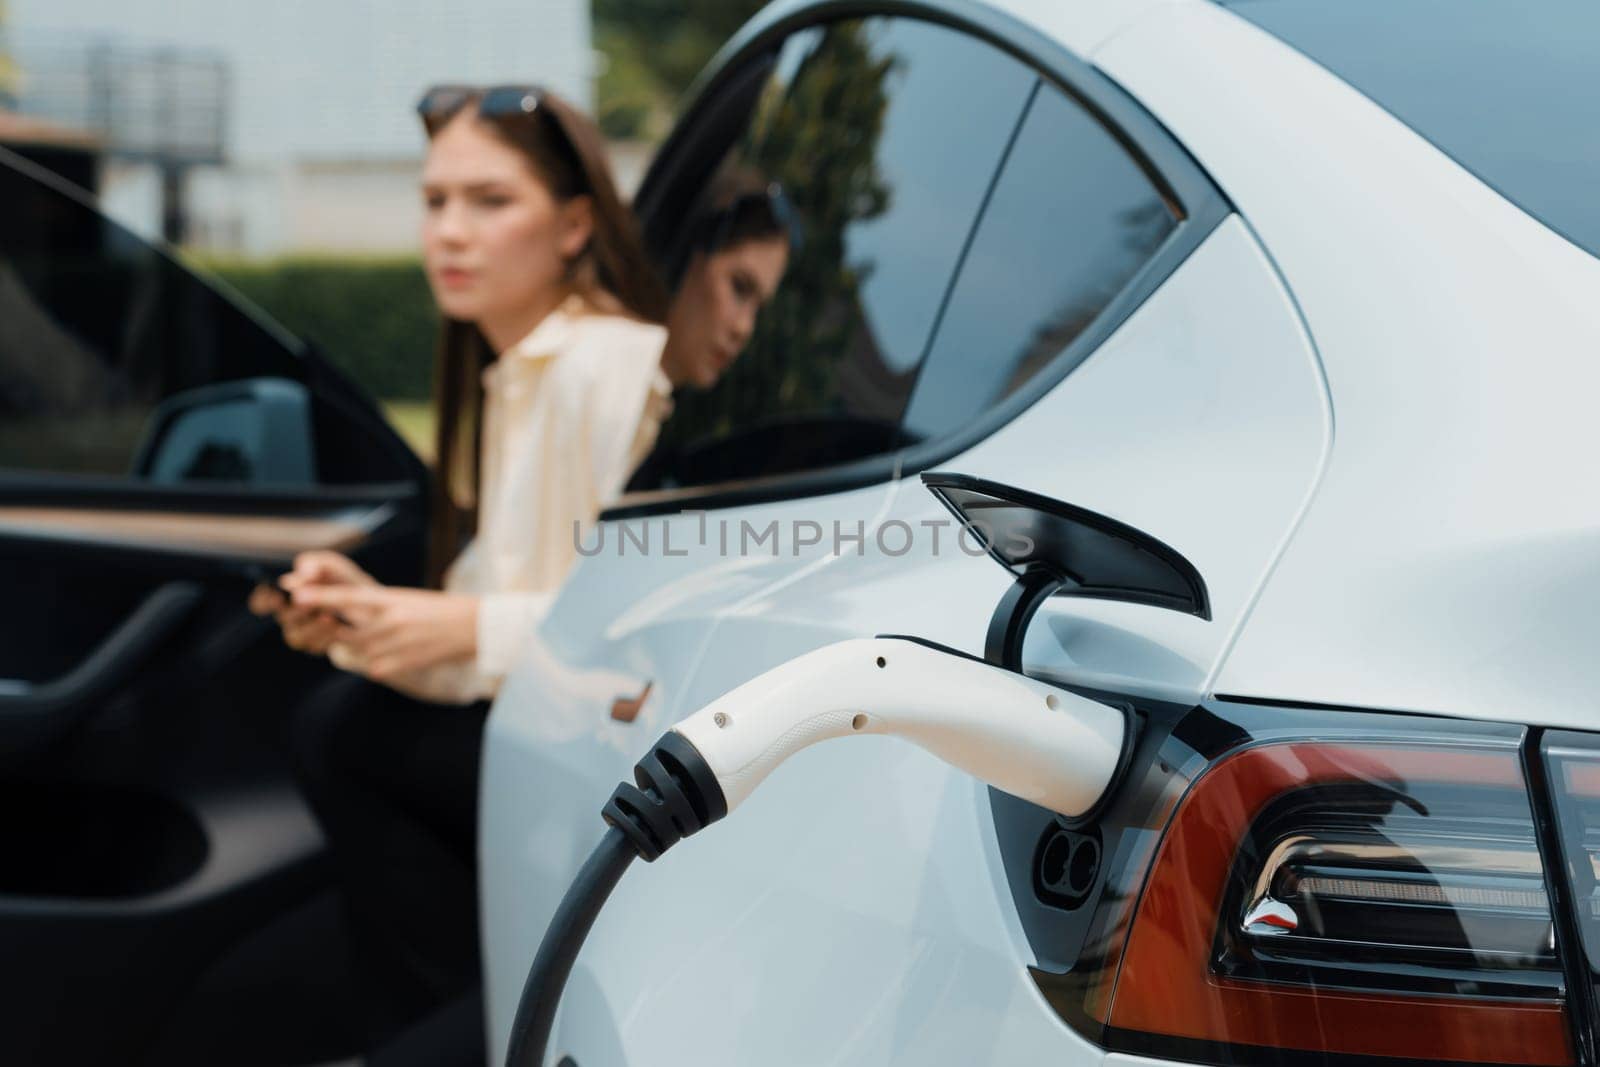 Young woman use smartphone to pay for electricity at public EV car charging station green city park. Modern environmental and sustainable urban lifestyle with EV vehicle. Expedient